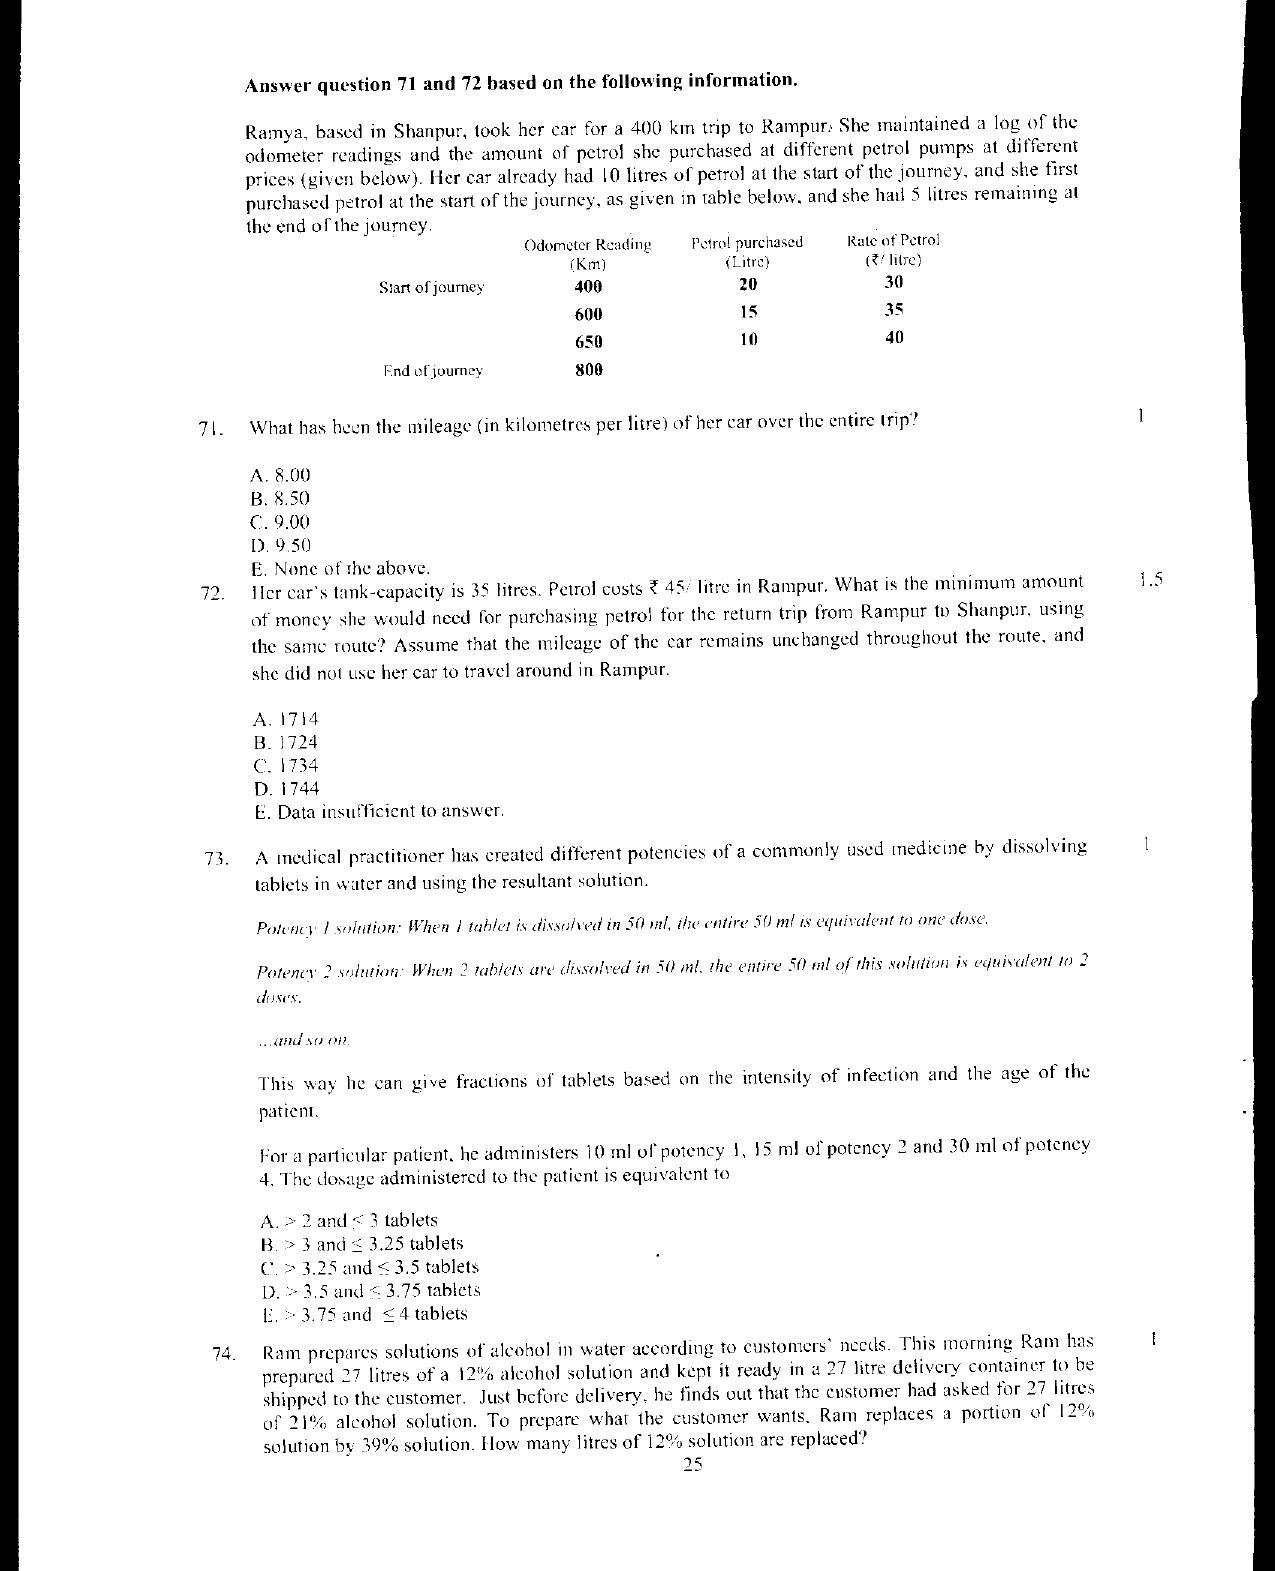 XAT 2012 Question Papers - Page 26